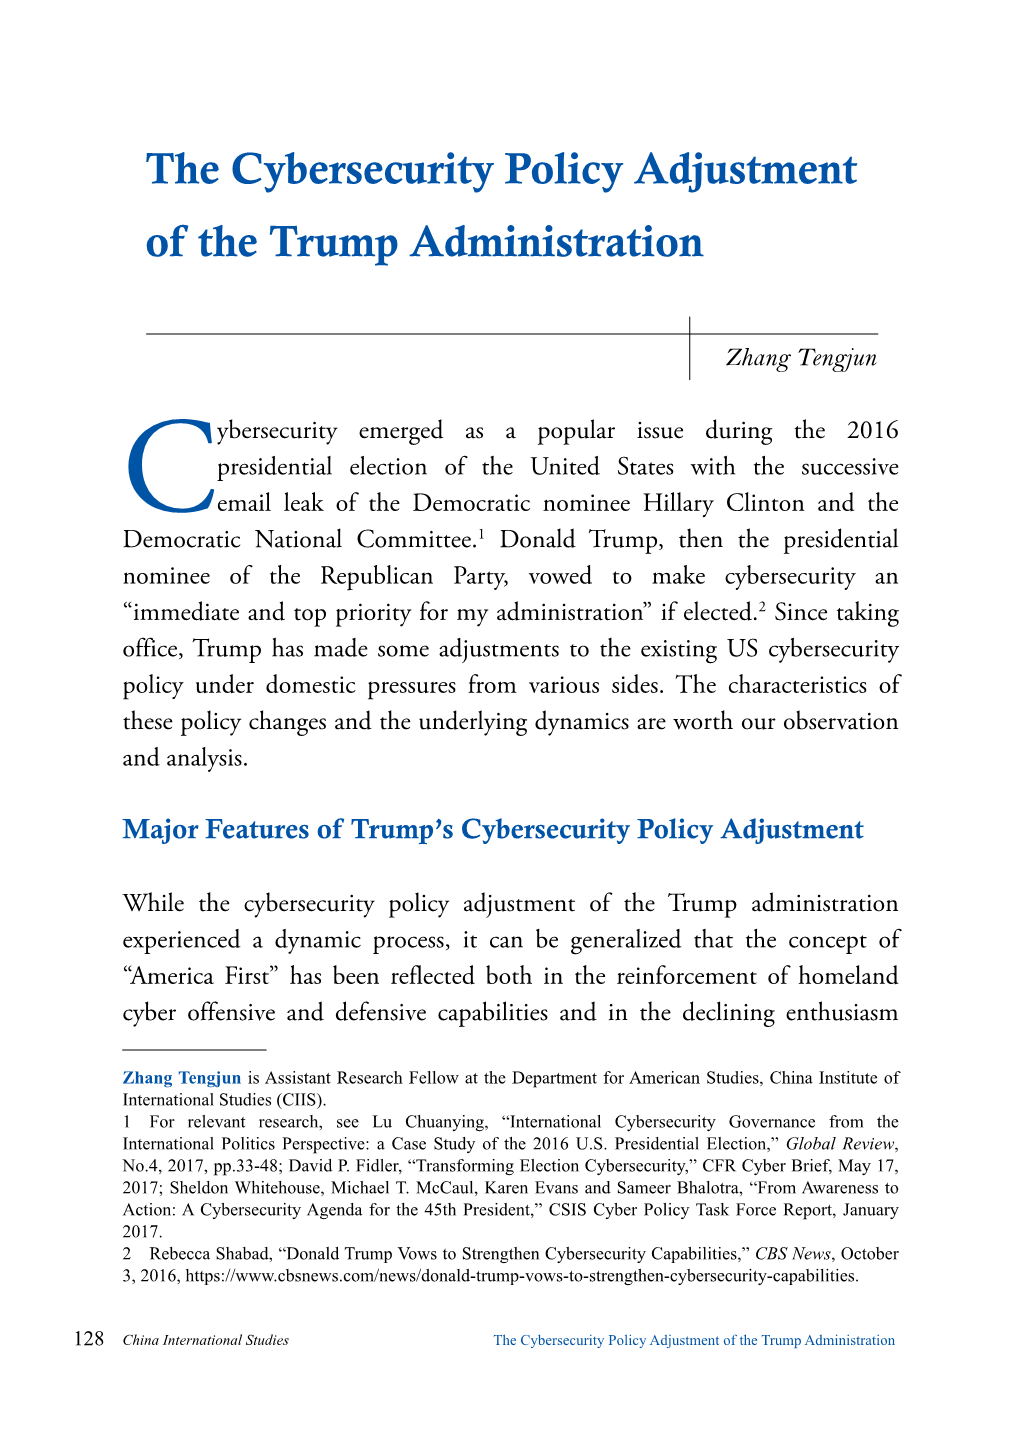 The Cybersecurity Policy Adjustment of the Trump Administration